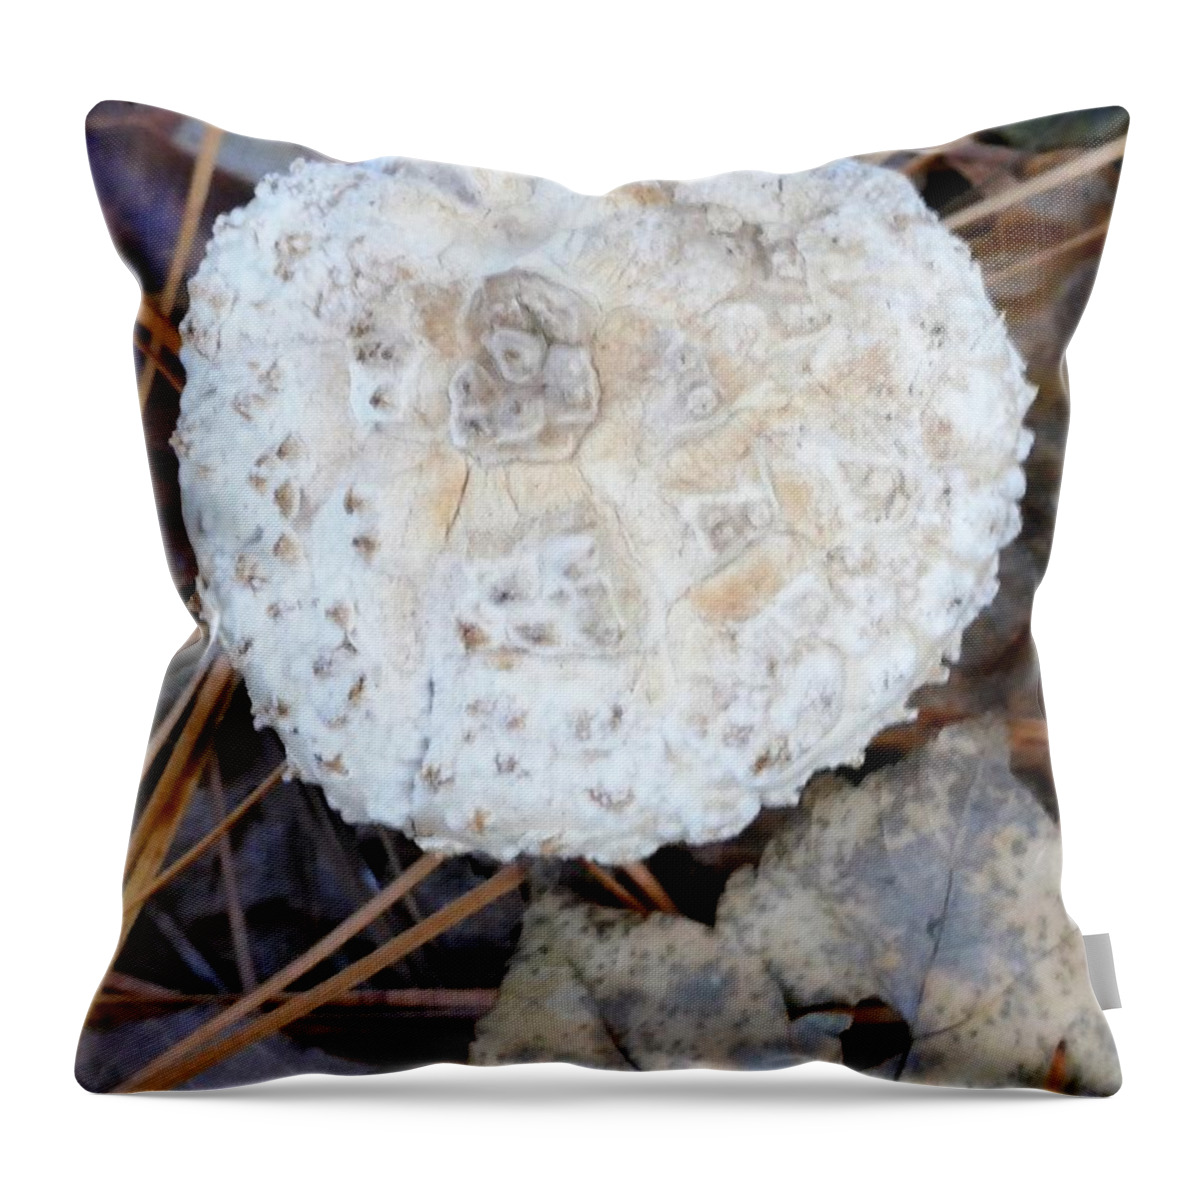 Mushroom Throw Pillow featuring the photograph Creature in the Mushroom by Tom Horsch Photography